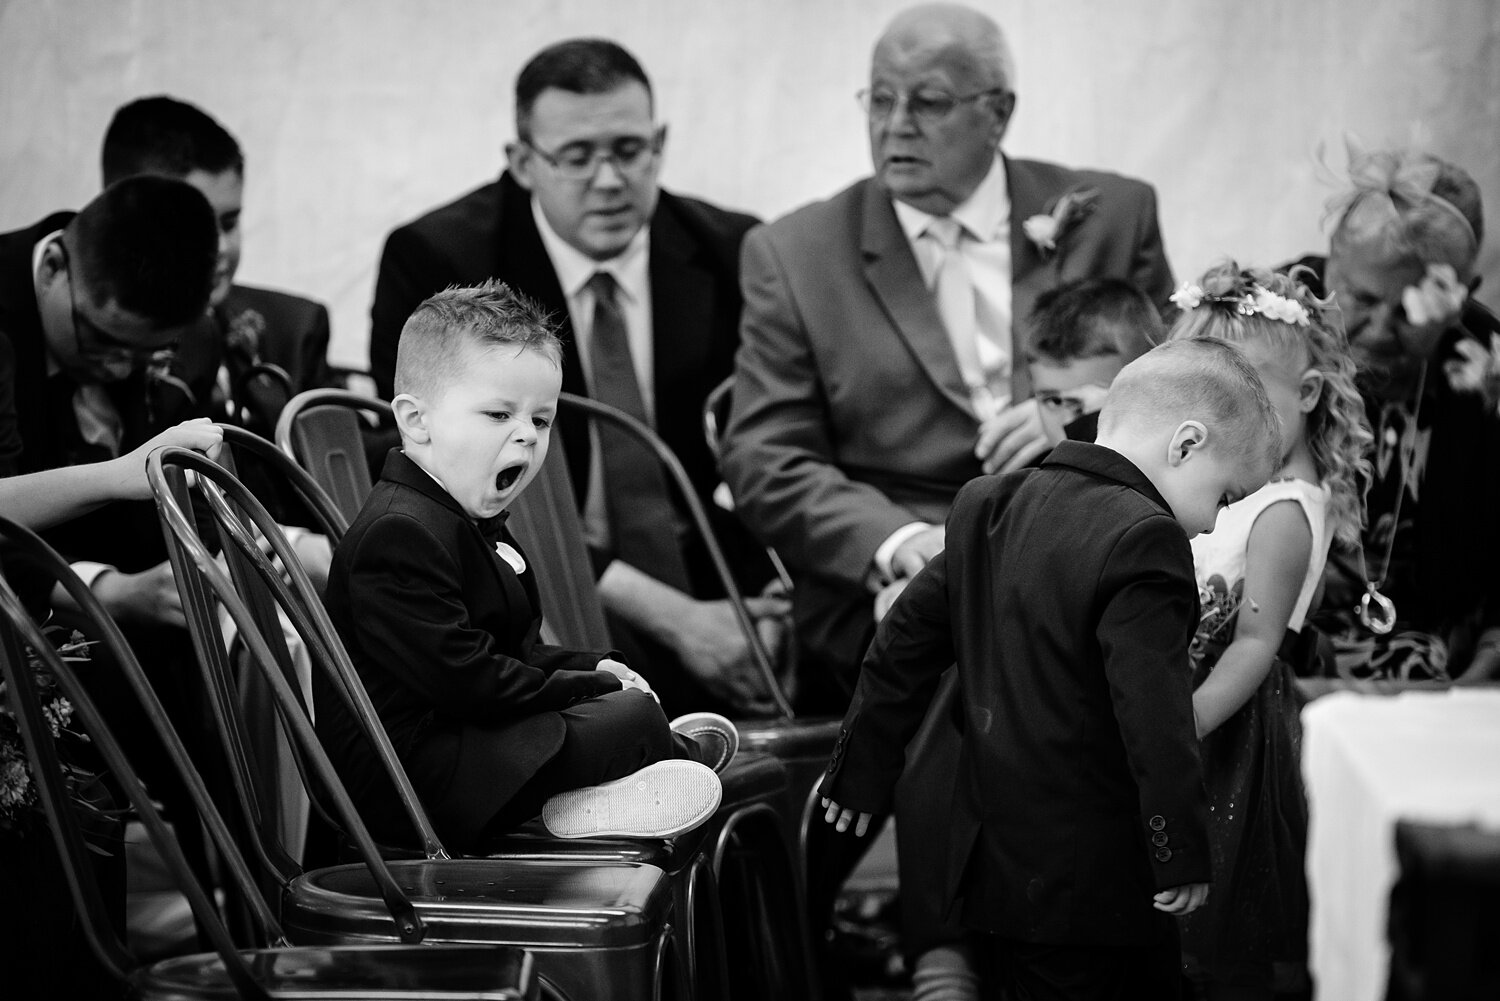  Pageboy bored at the wedding ceremony.  